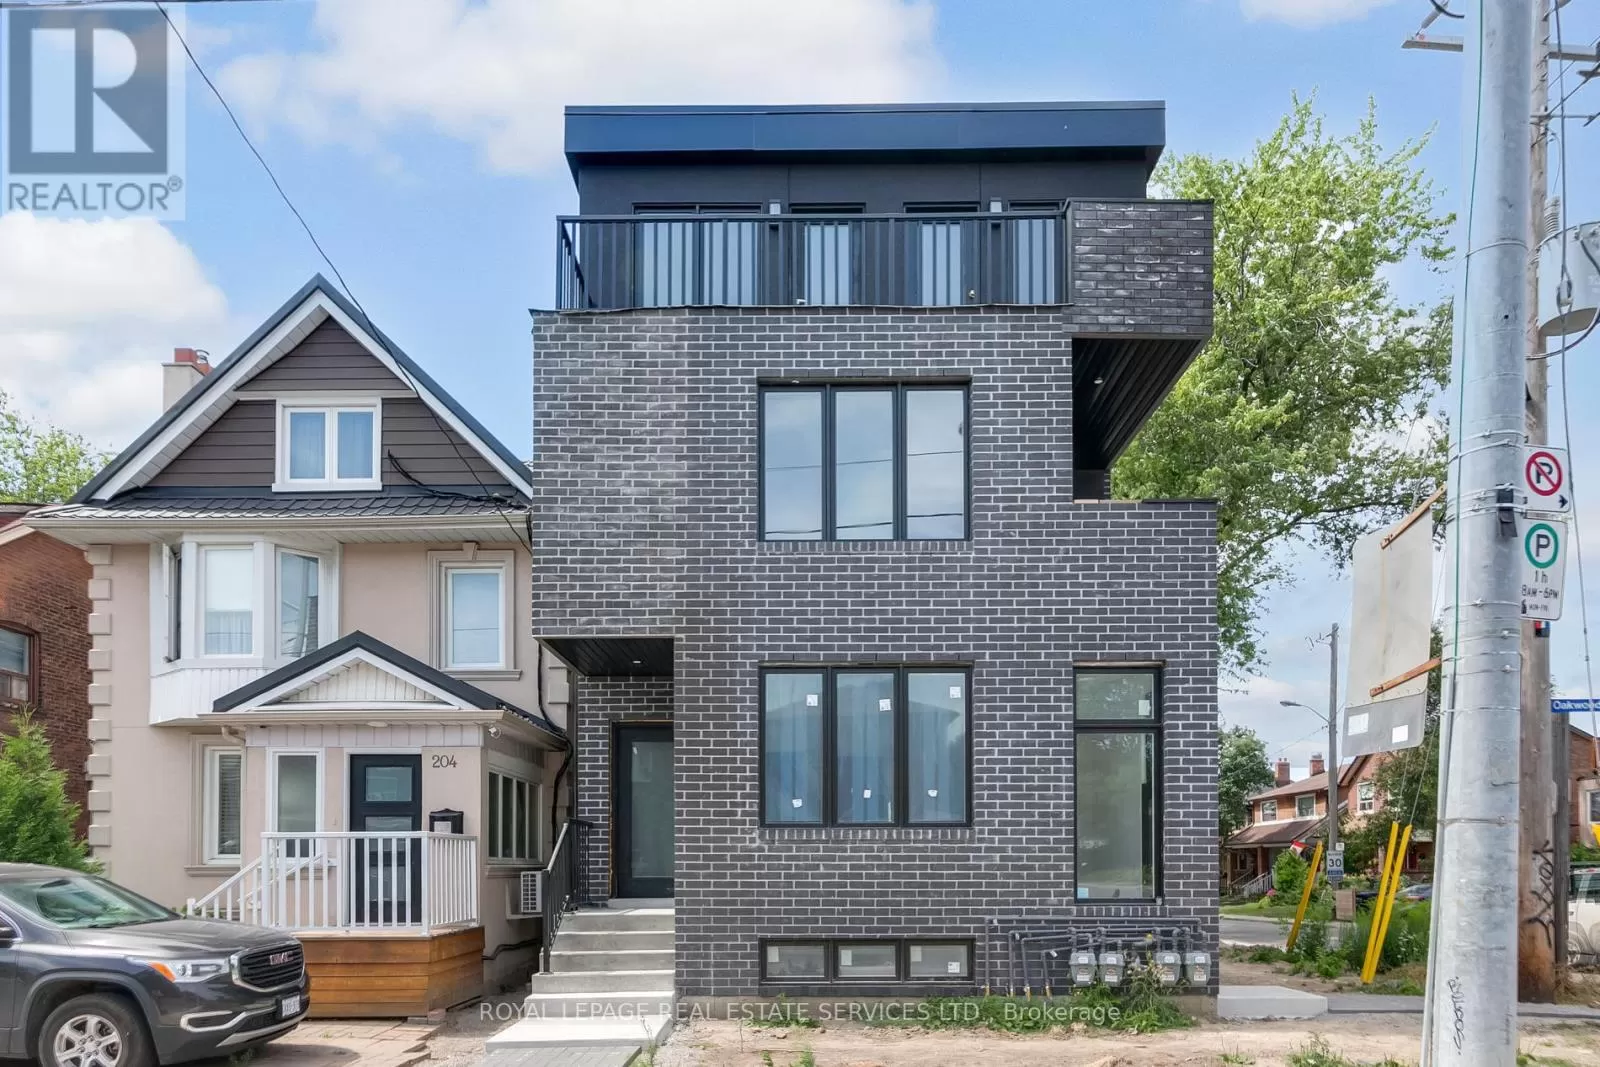 Other for rent: Main - 206 Oakwood Avenue, Toronto, Ontario M6E 2T9